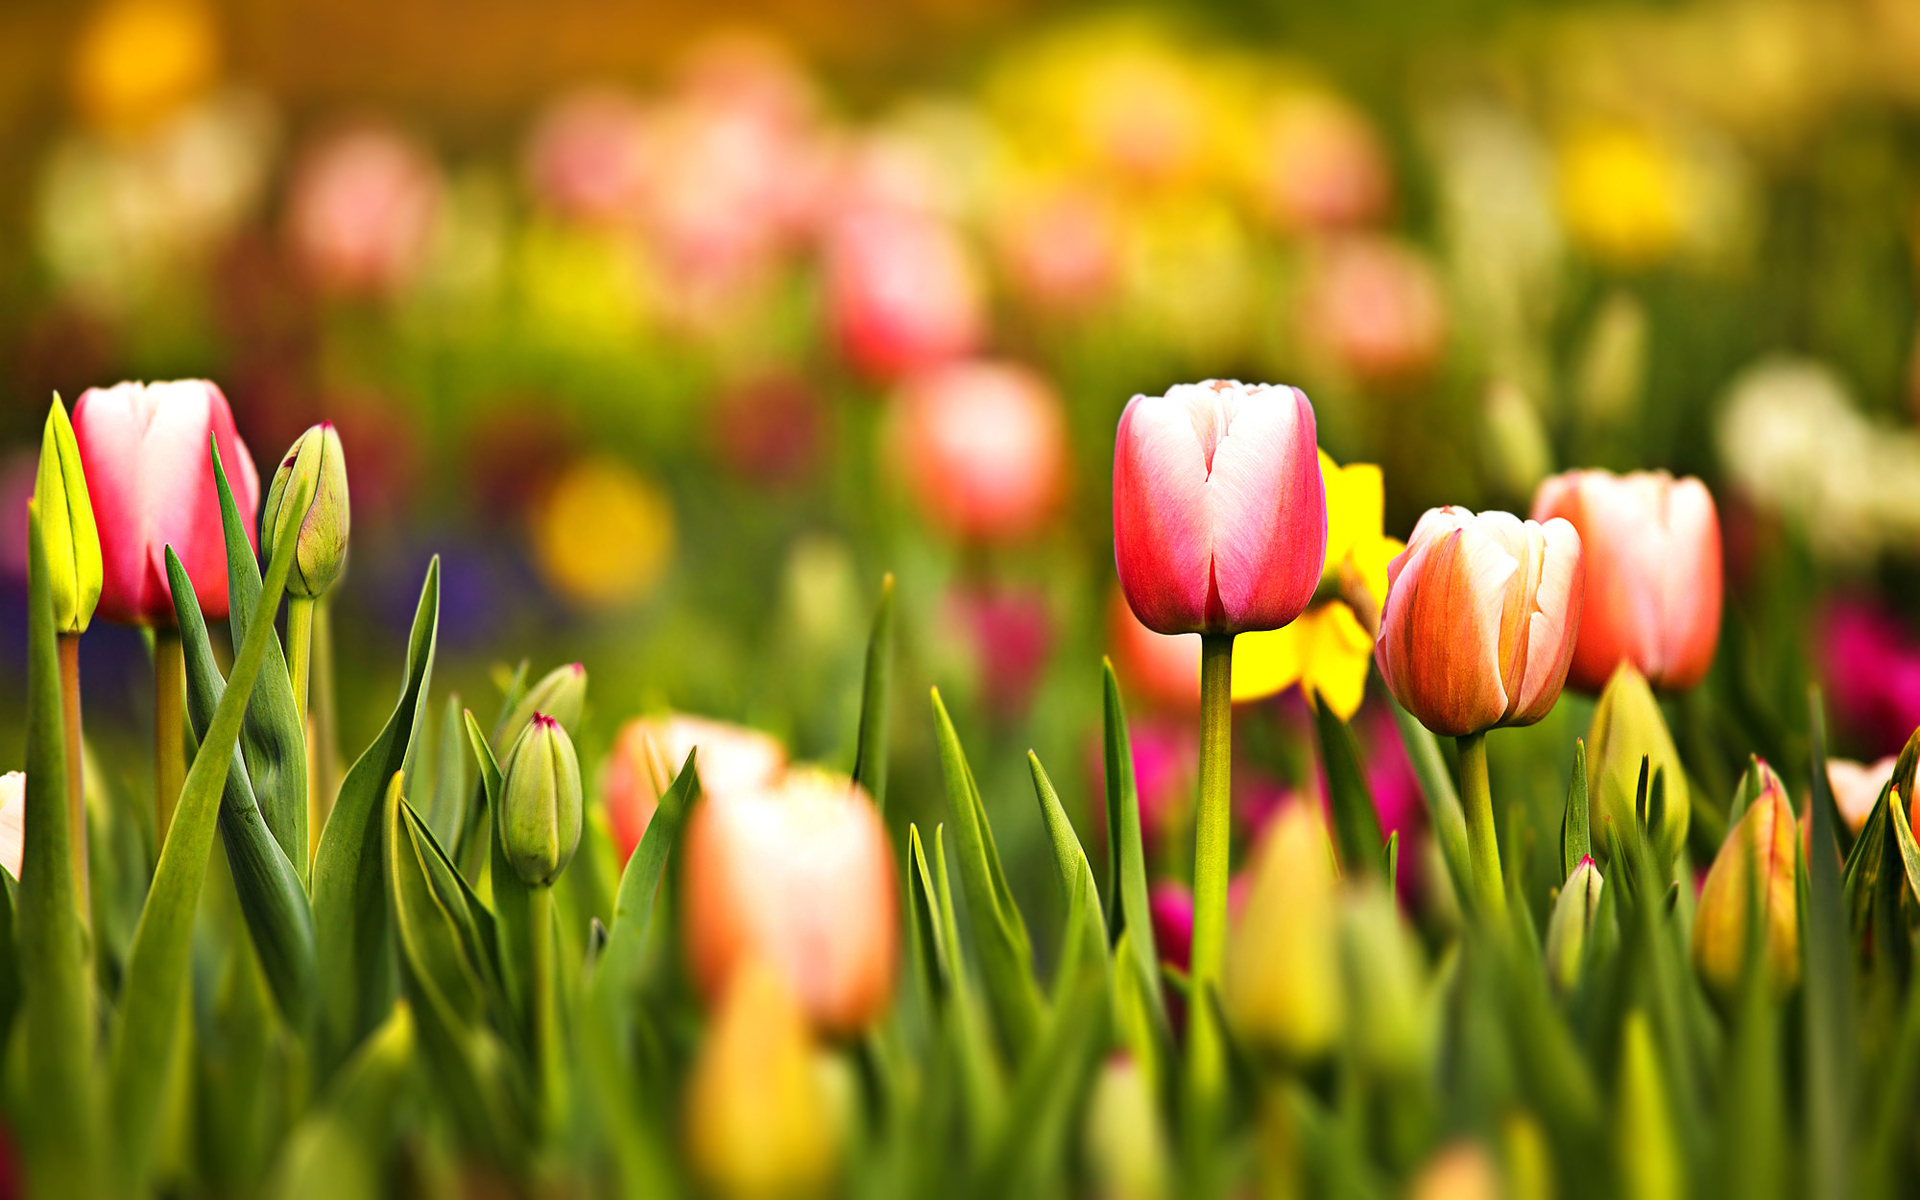 blooming tulips wallpapers and images - wallpapers ...
 Images Of Nature And Flowers